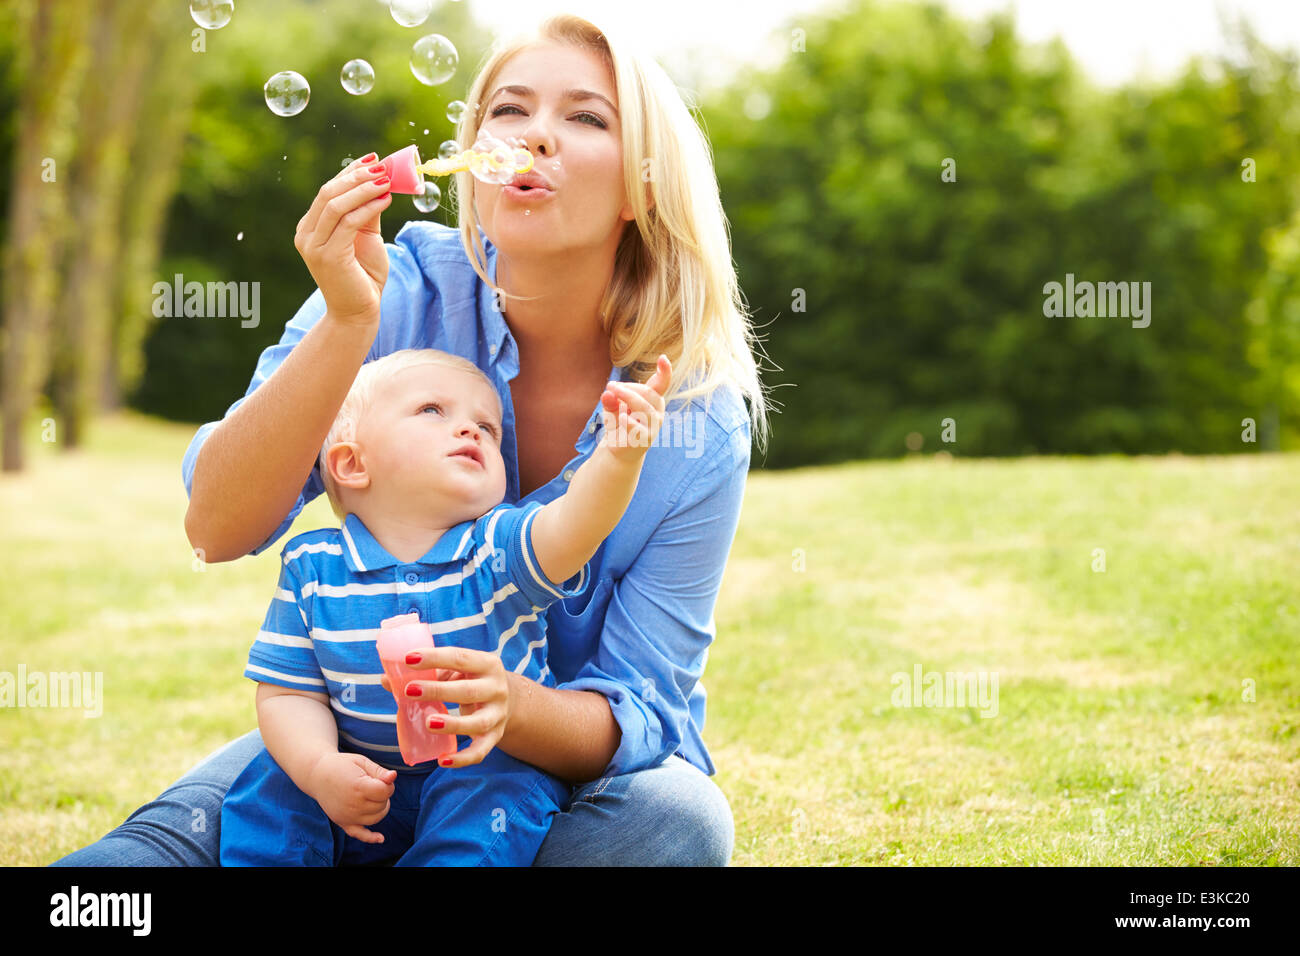 Mother Blowing Bubbles For Young Boy In Garden Stock Photo